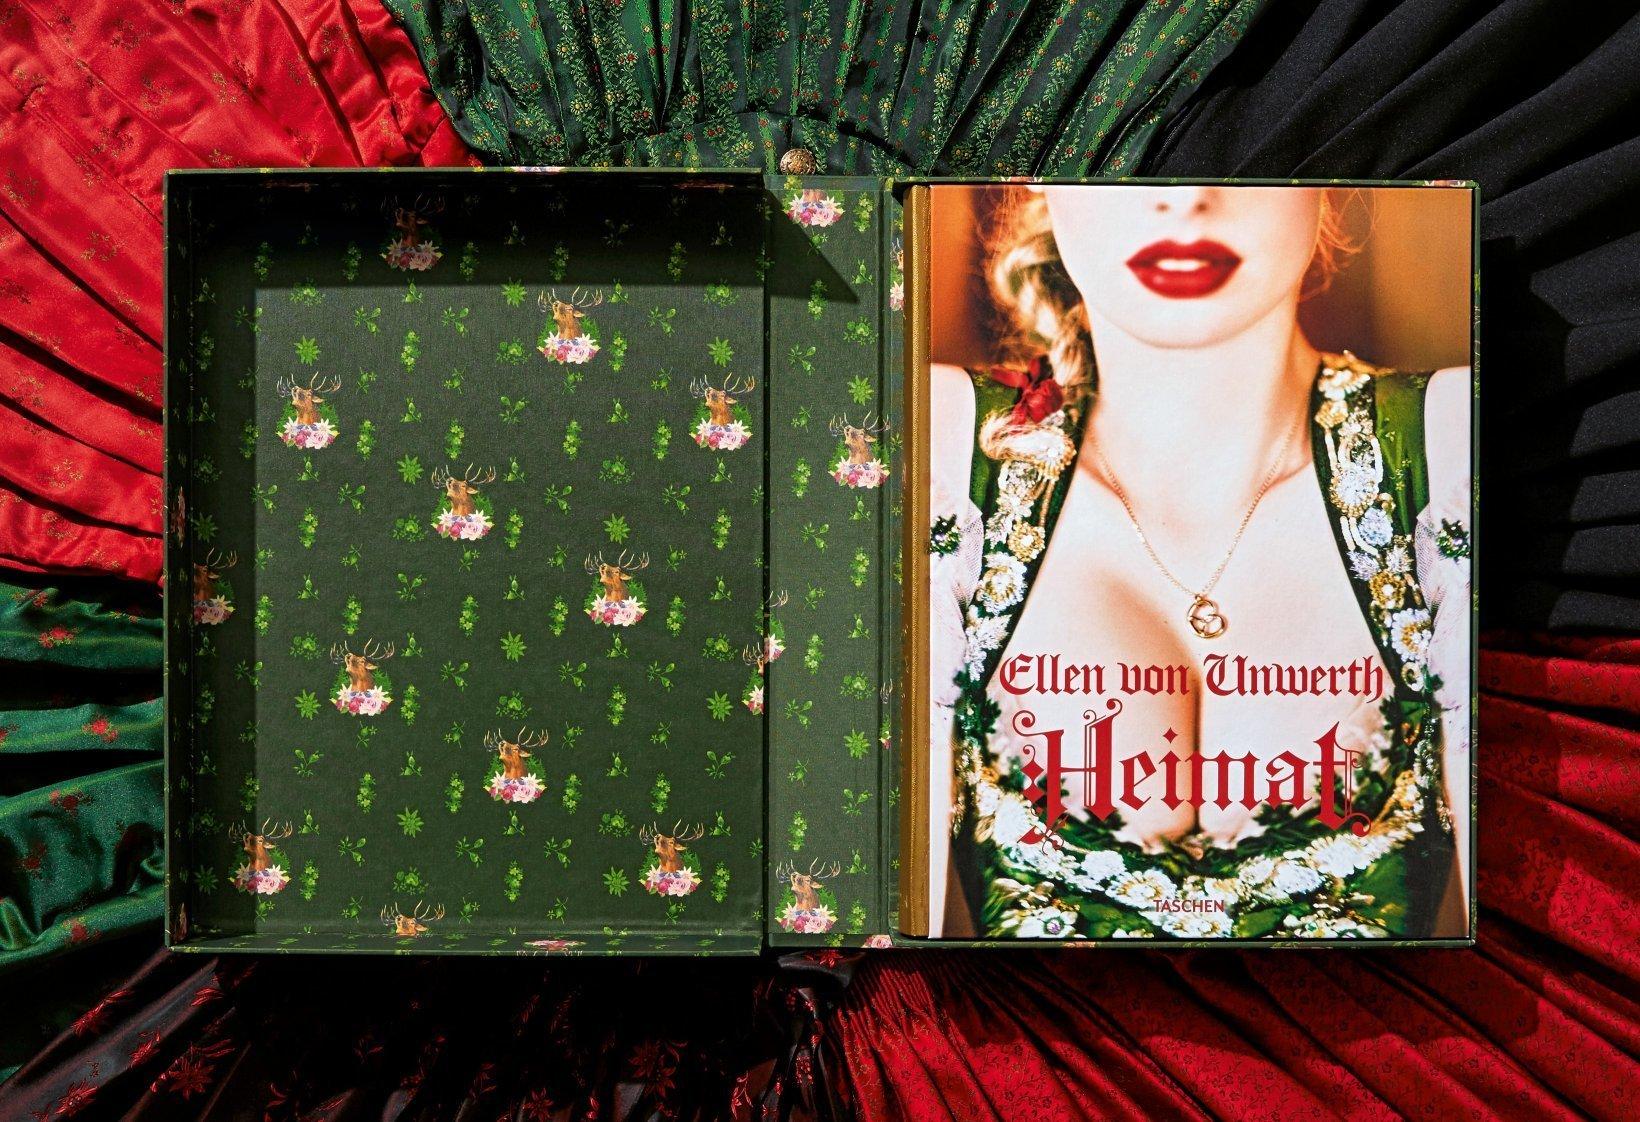 Welcome to Heimat
An enchanted trip through Bavaria with Ellen von Unwerth
Ellen von Unwerth’s puckish humor pervades the pages of Heimat, an enchanted tour around Bavaria. The renowned fashion and music photographer revisits her childhood